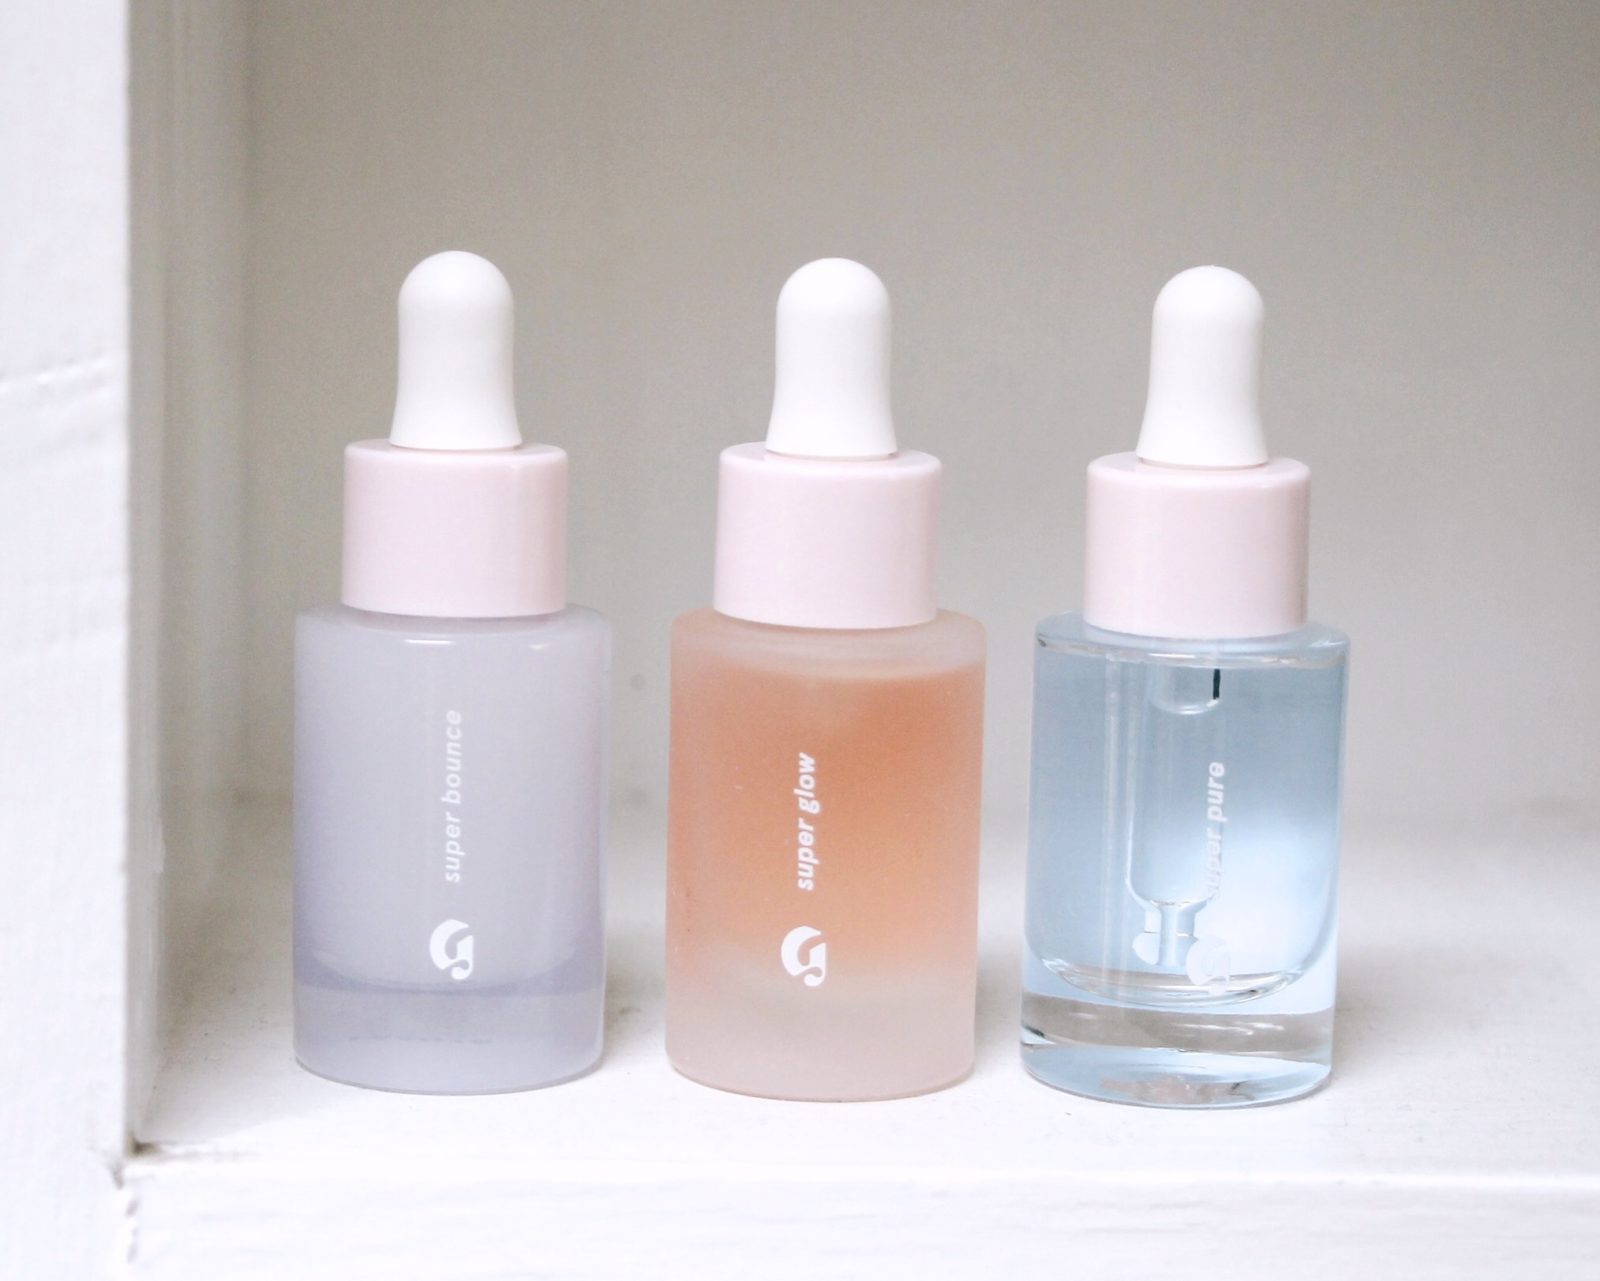 Glossier Supers Review: New Serums!